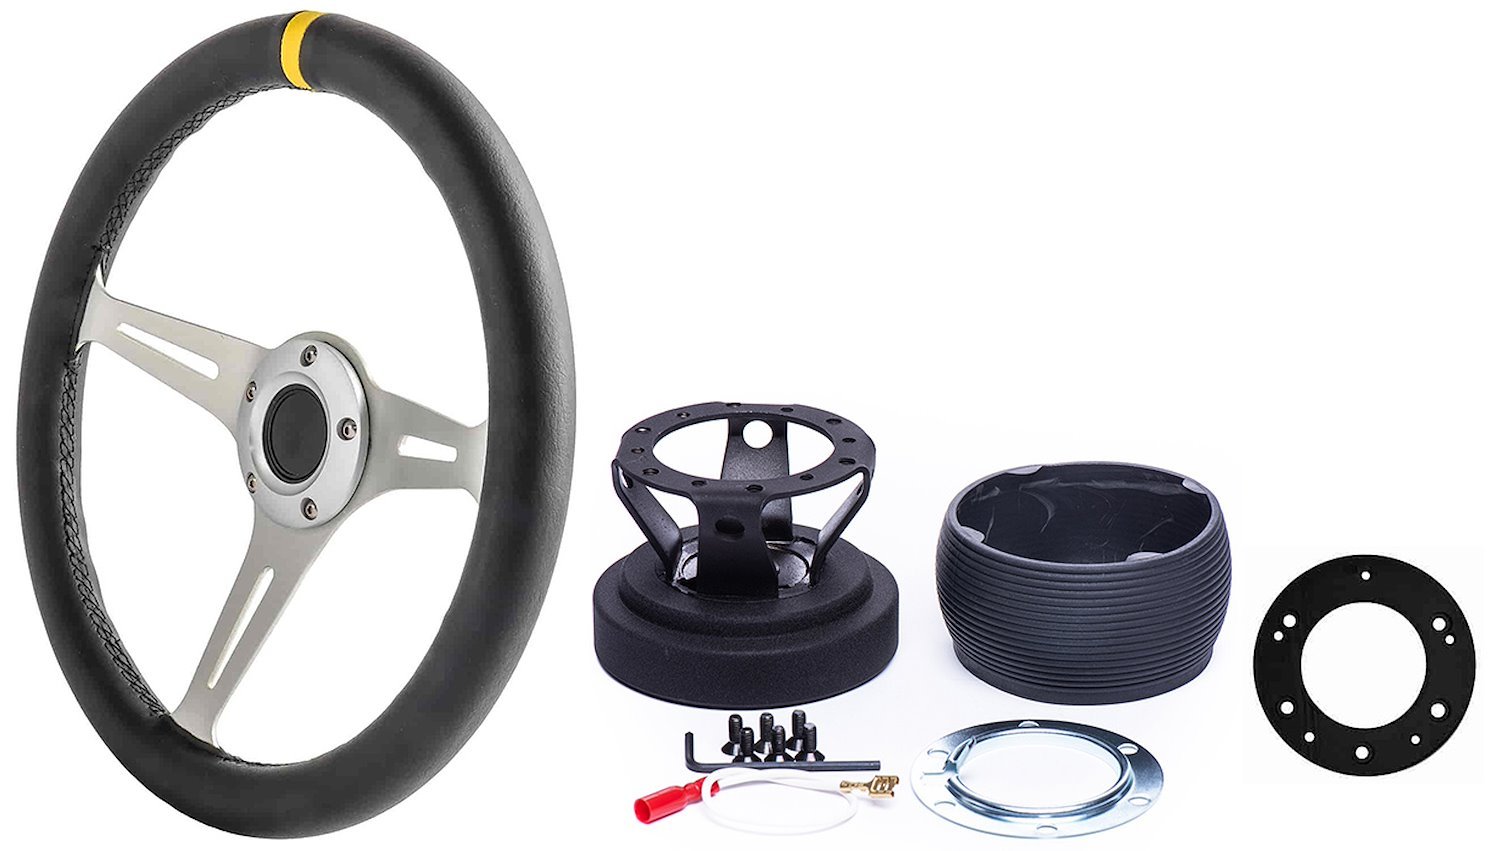 Aluminum Hub Adapter, Adapter Plate, and Black Leather Racing Steering Wheel Kit - Fits Select GM and Mopar Models